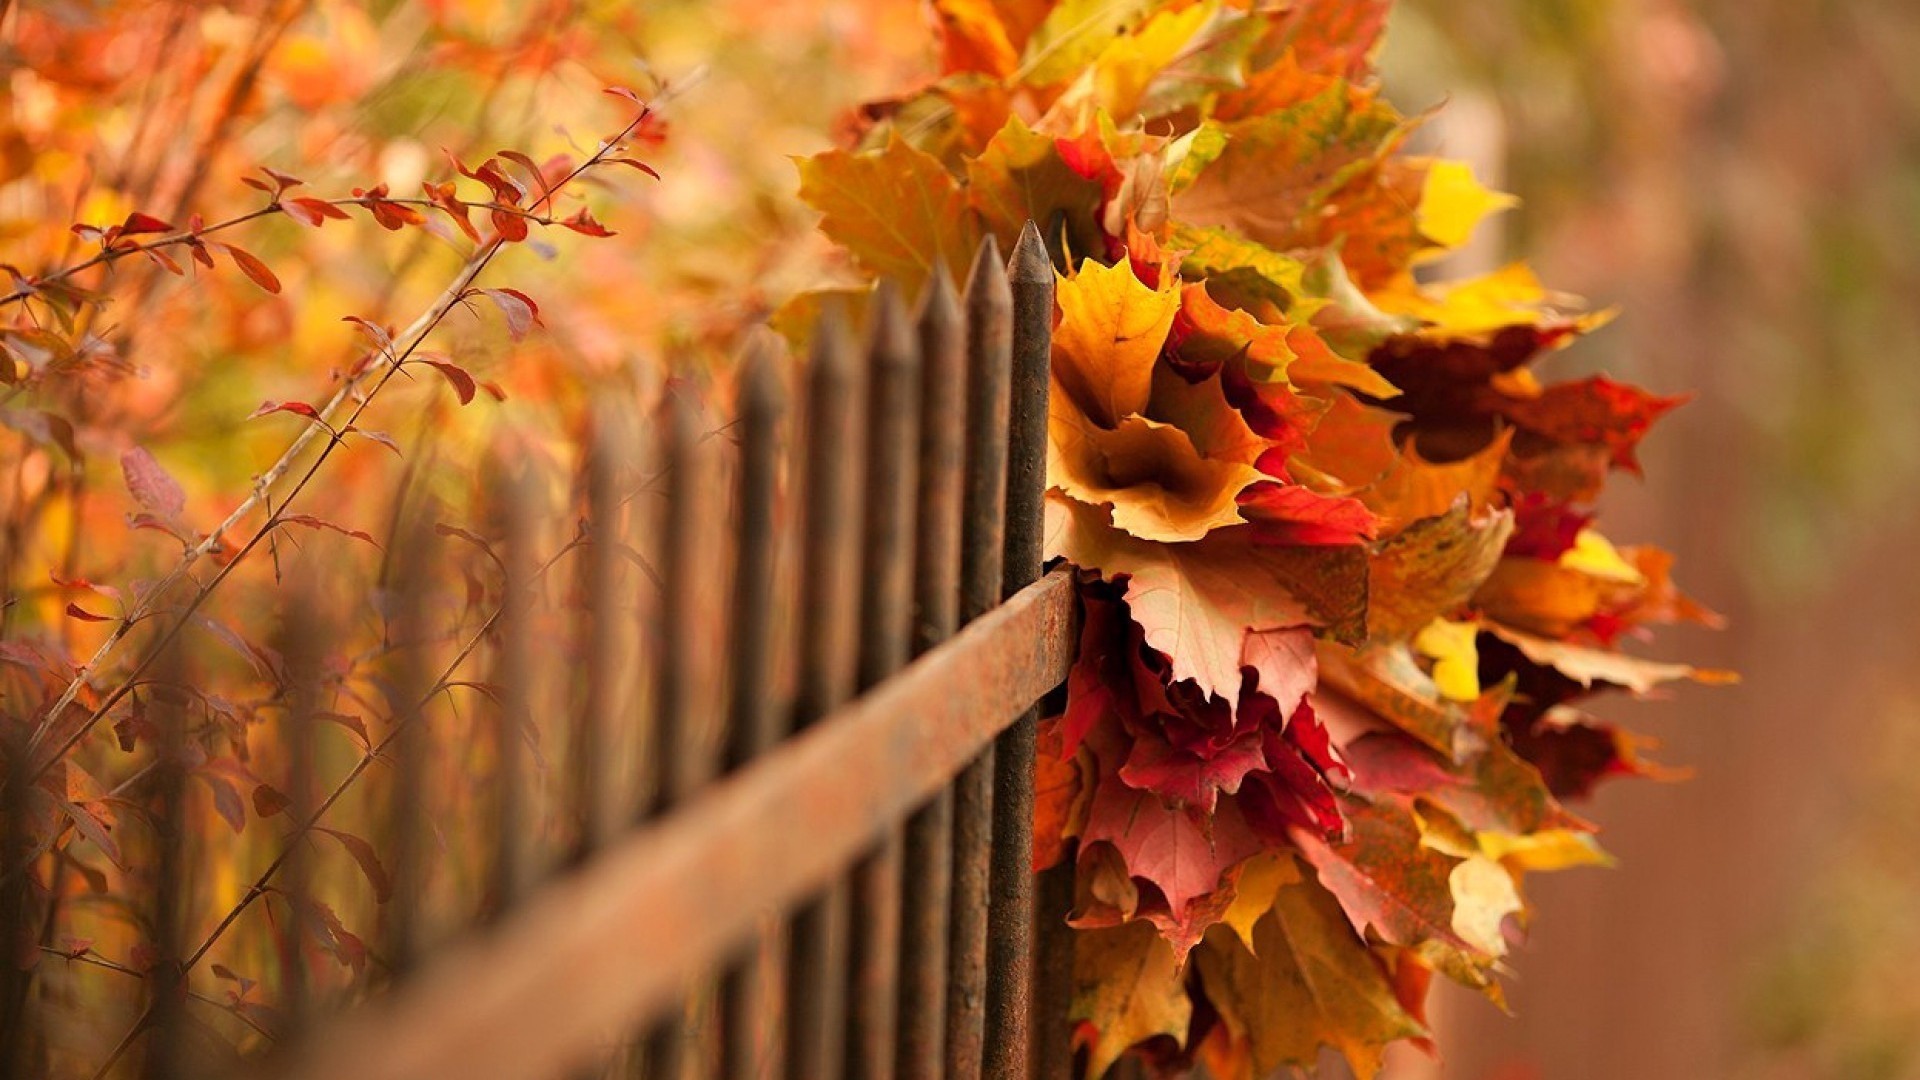 General 1920x1080 nature leaves fall branch fence depth of field